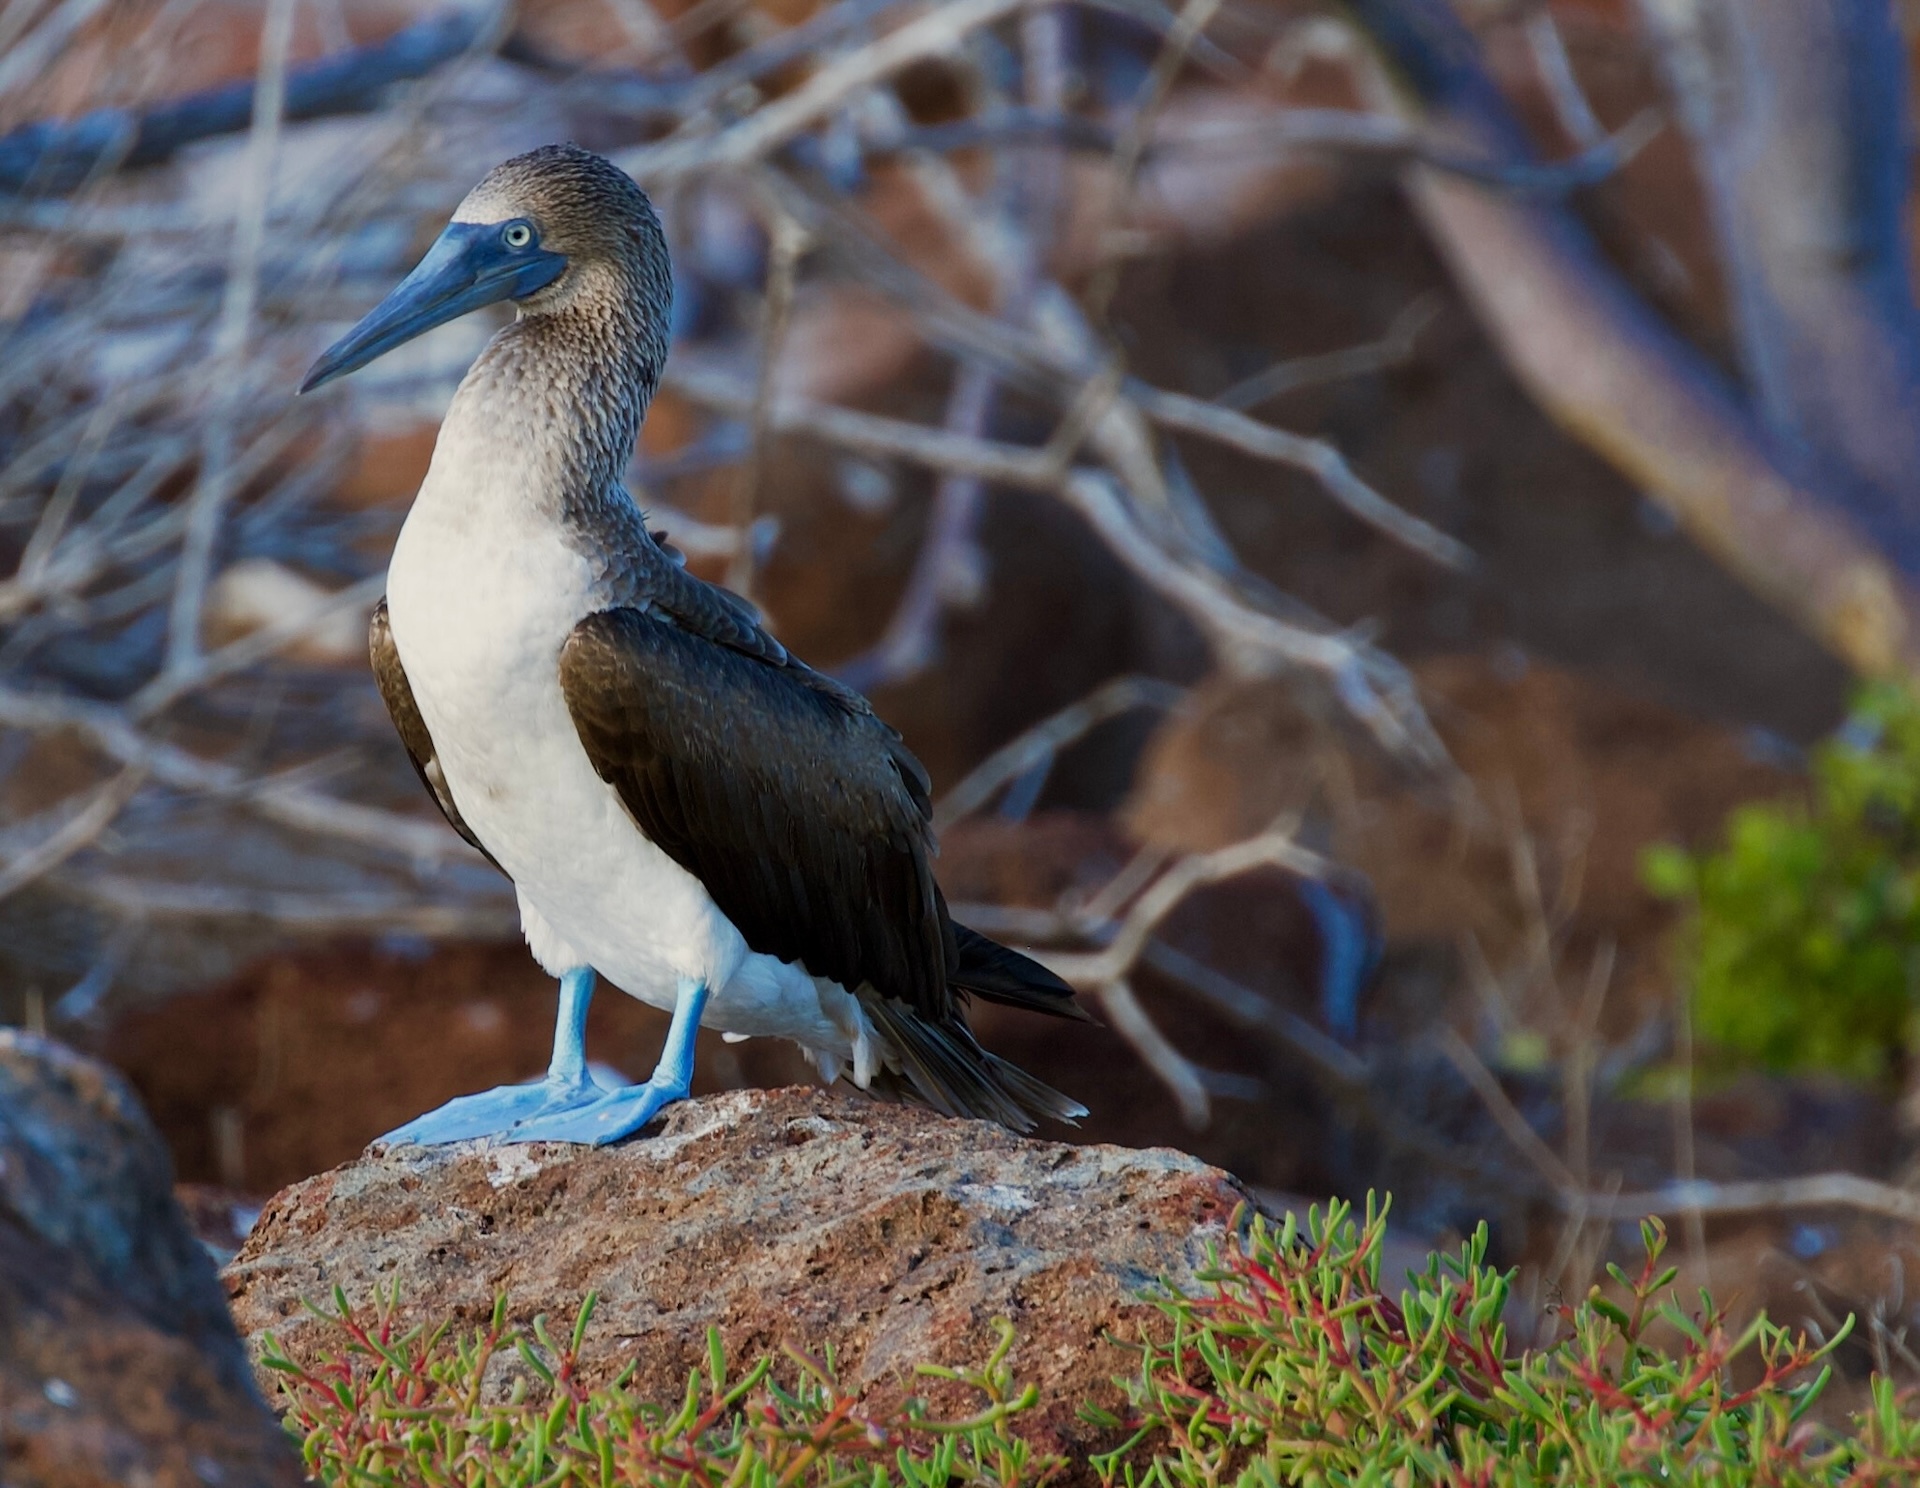 Blue-footed booby in the Galapagos by Vera Irions